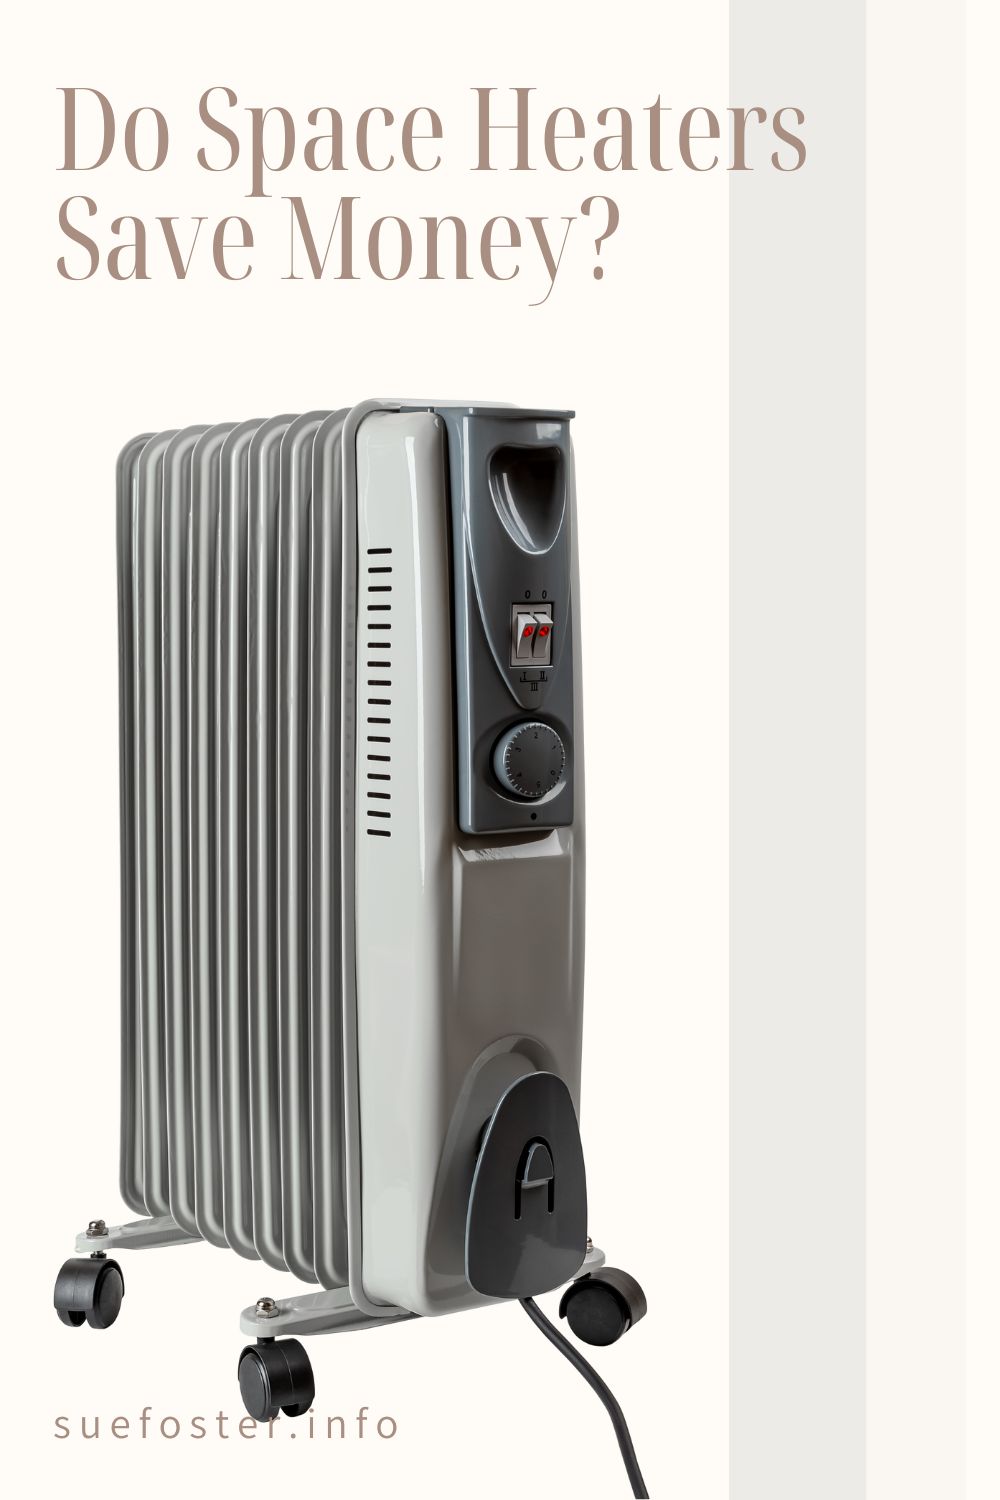 Looking for ways to save money on your heating bills? Find out if space heaters are a cost-effective solution in this blog post. We'll explore the benefits and drawbacks of using space heaters and help you determine if they're worth the investment.